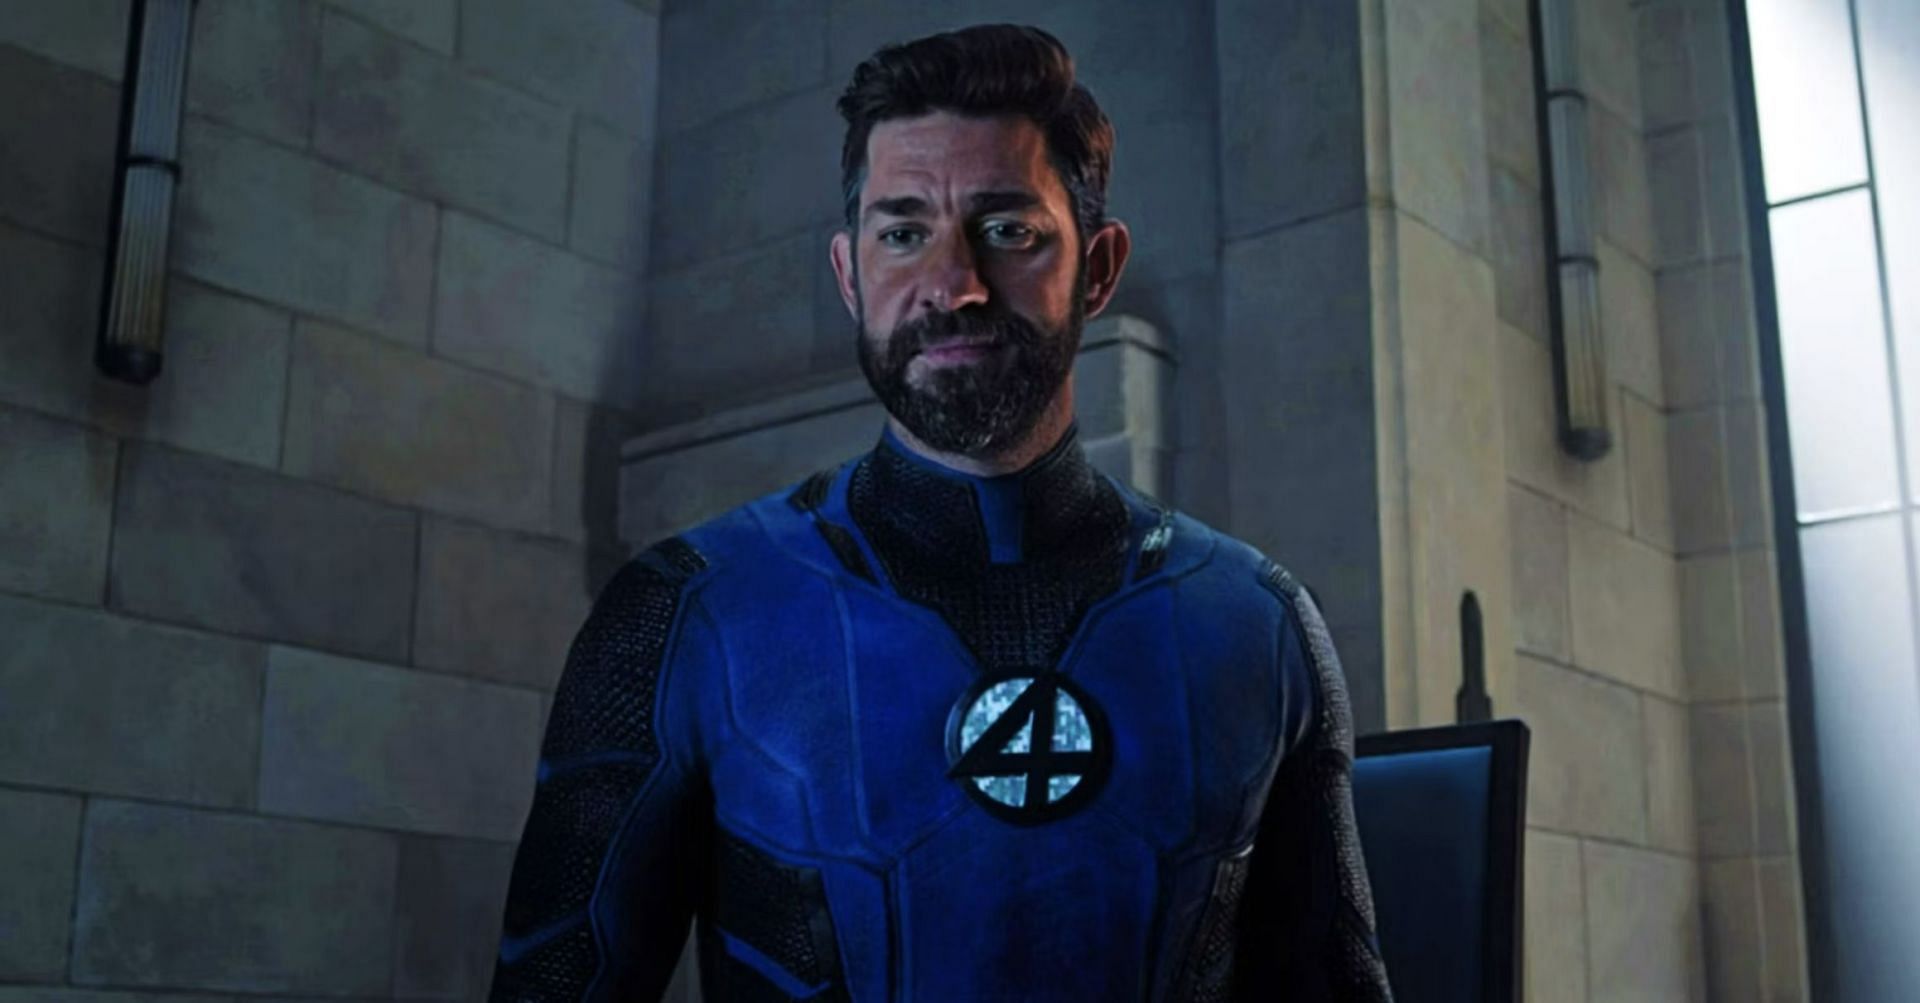 Leader of the Fantastic Four and a brilliant scientist with the ability to stretch his body (Image via Marvel Studios)